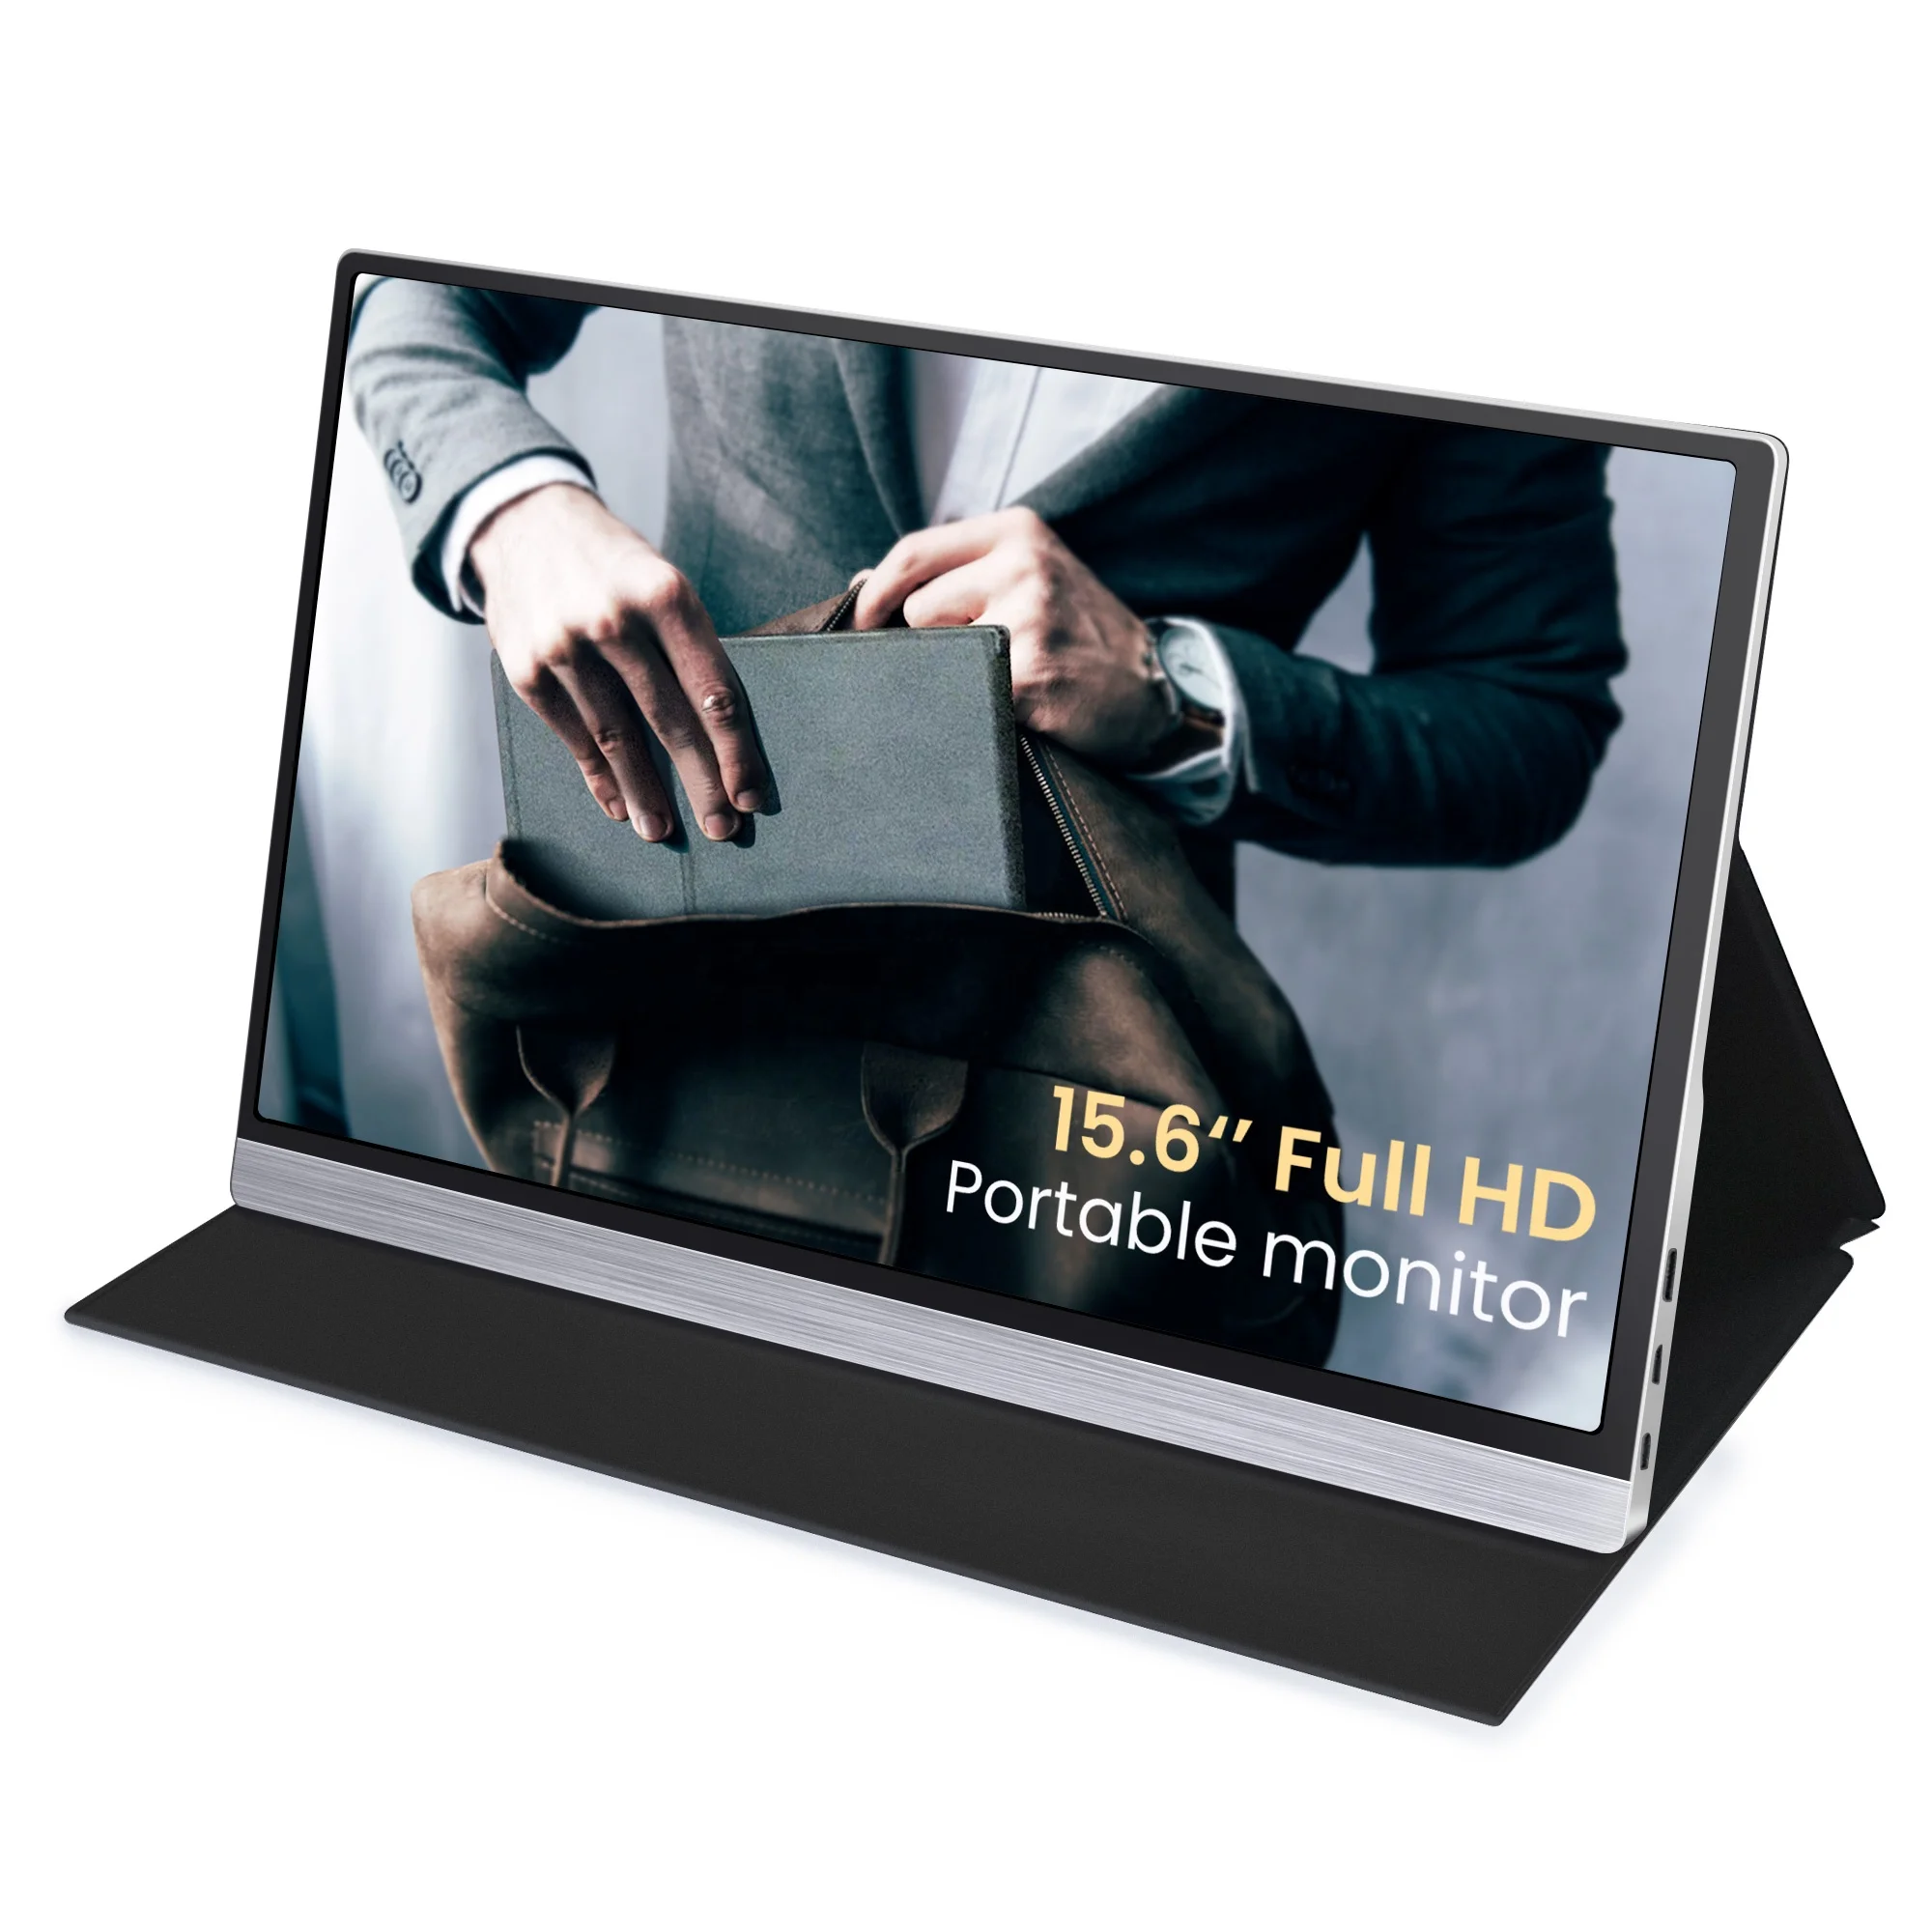 

1080P 15.6 inch full-featured type-C Portable Display Direct connect Phone Portable monitor easy to connect your desktop and Lap